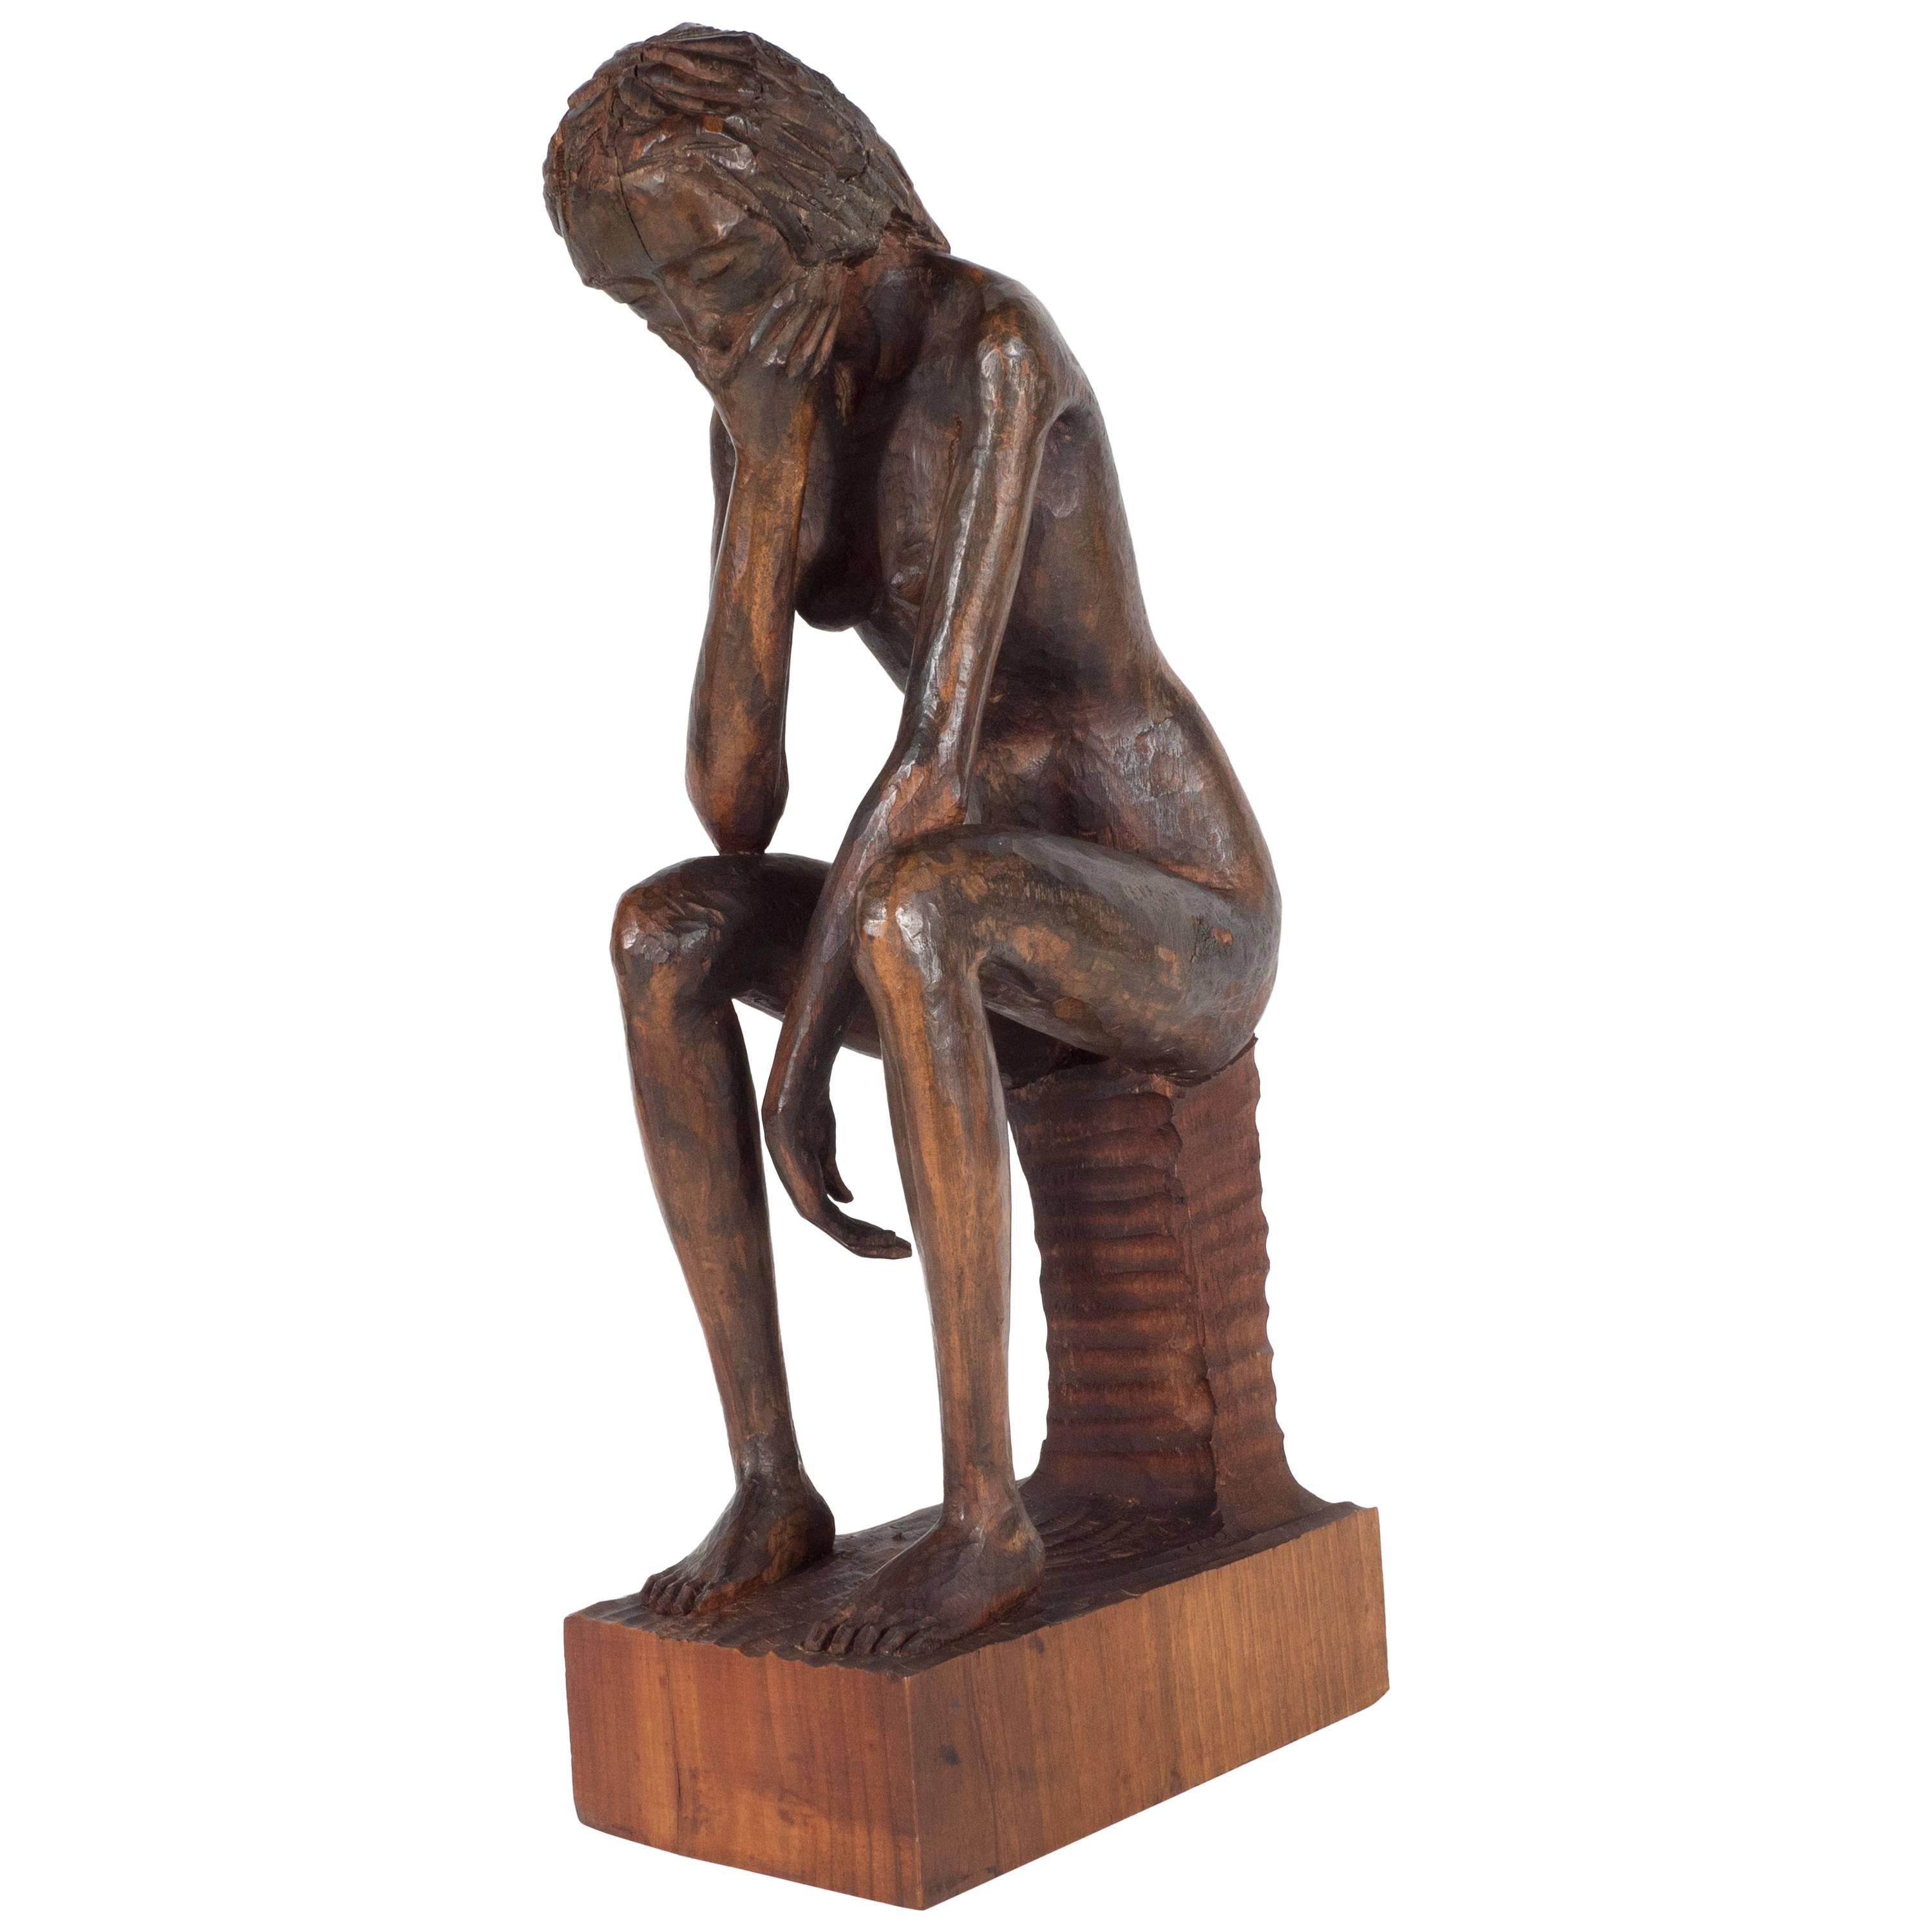 Hand-Carved Wood Contemplative Seated Nude Sculpture by Aldo Calo For Sale